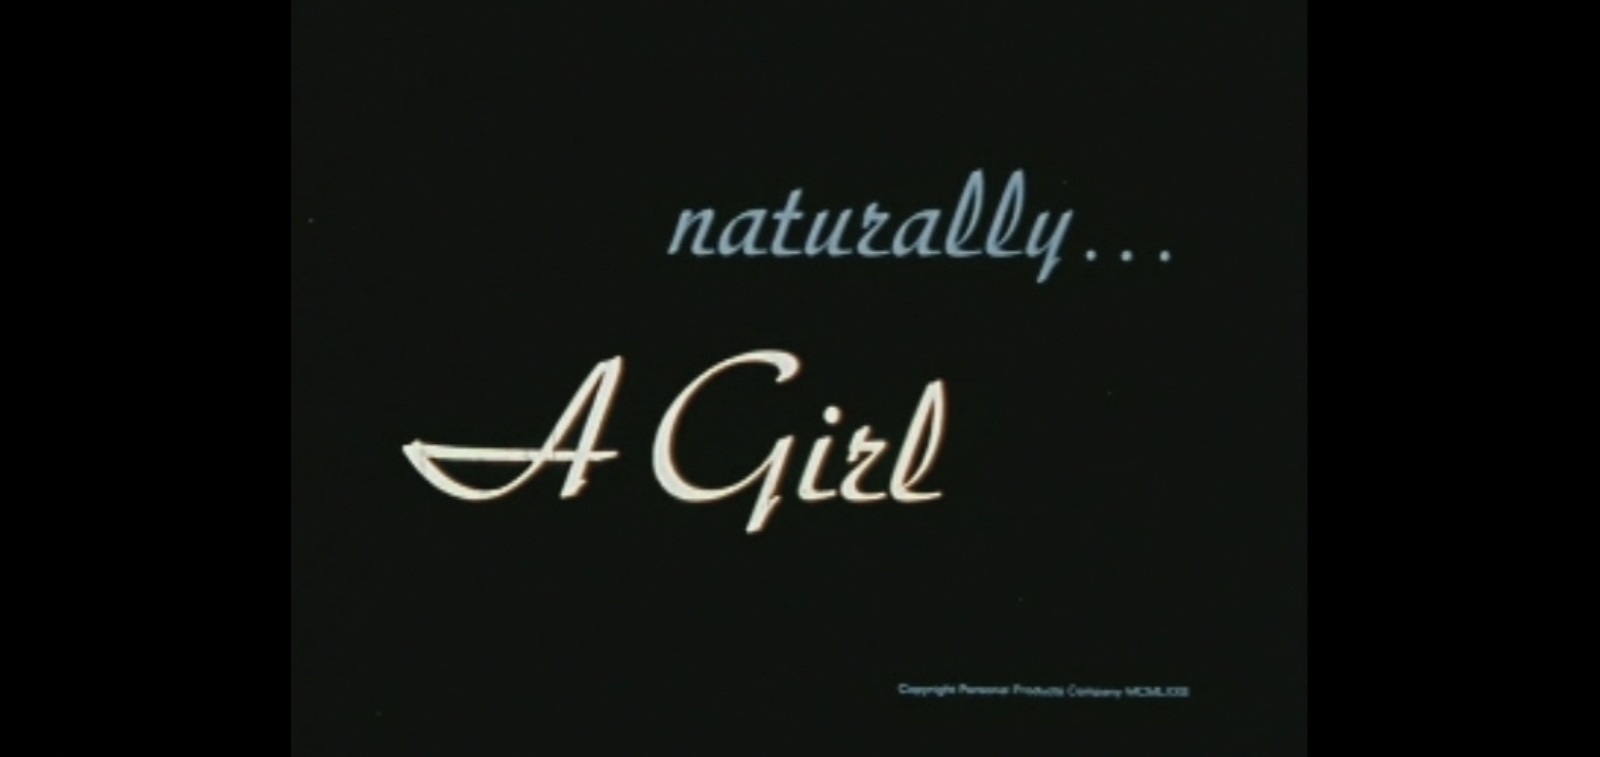 Naturally... a Girl (1973) starring N/A on DVD on DVD